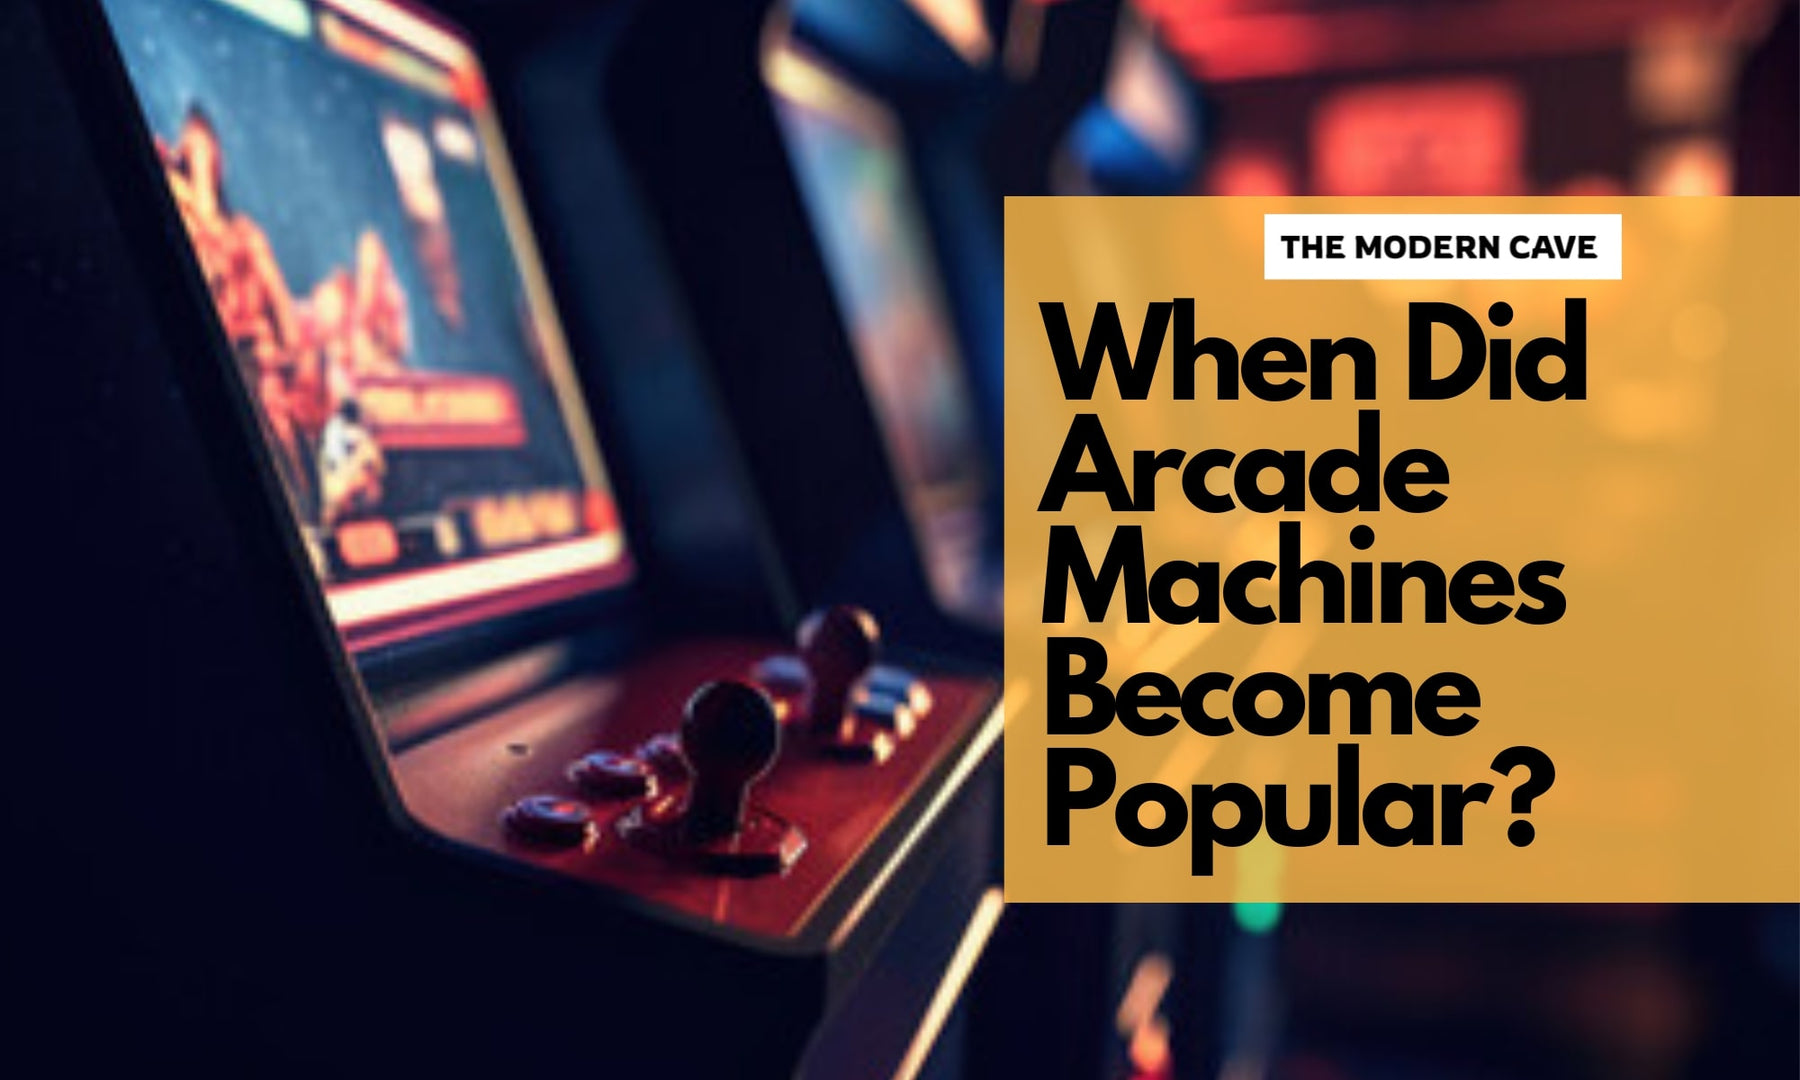 When Did Arcade Machines Become Popular?